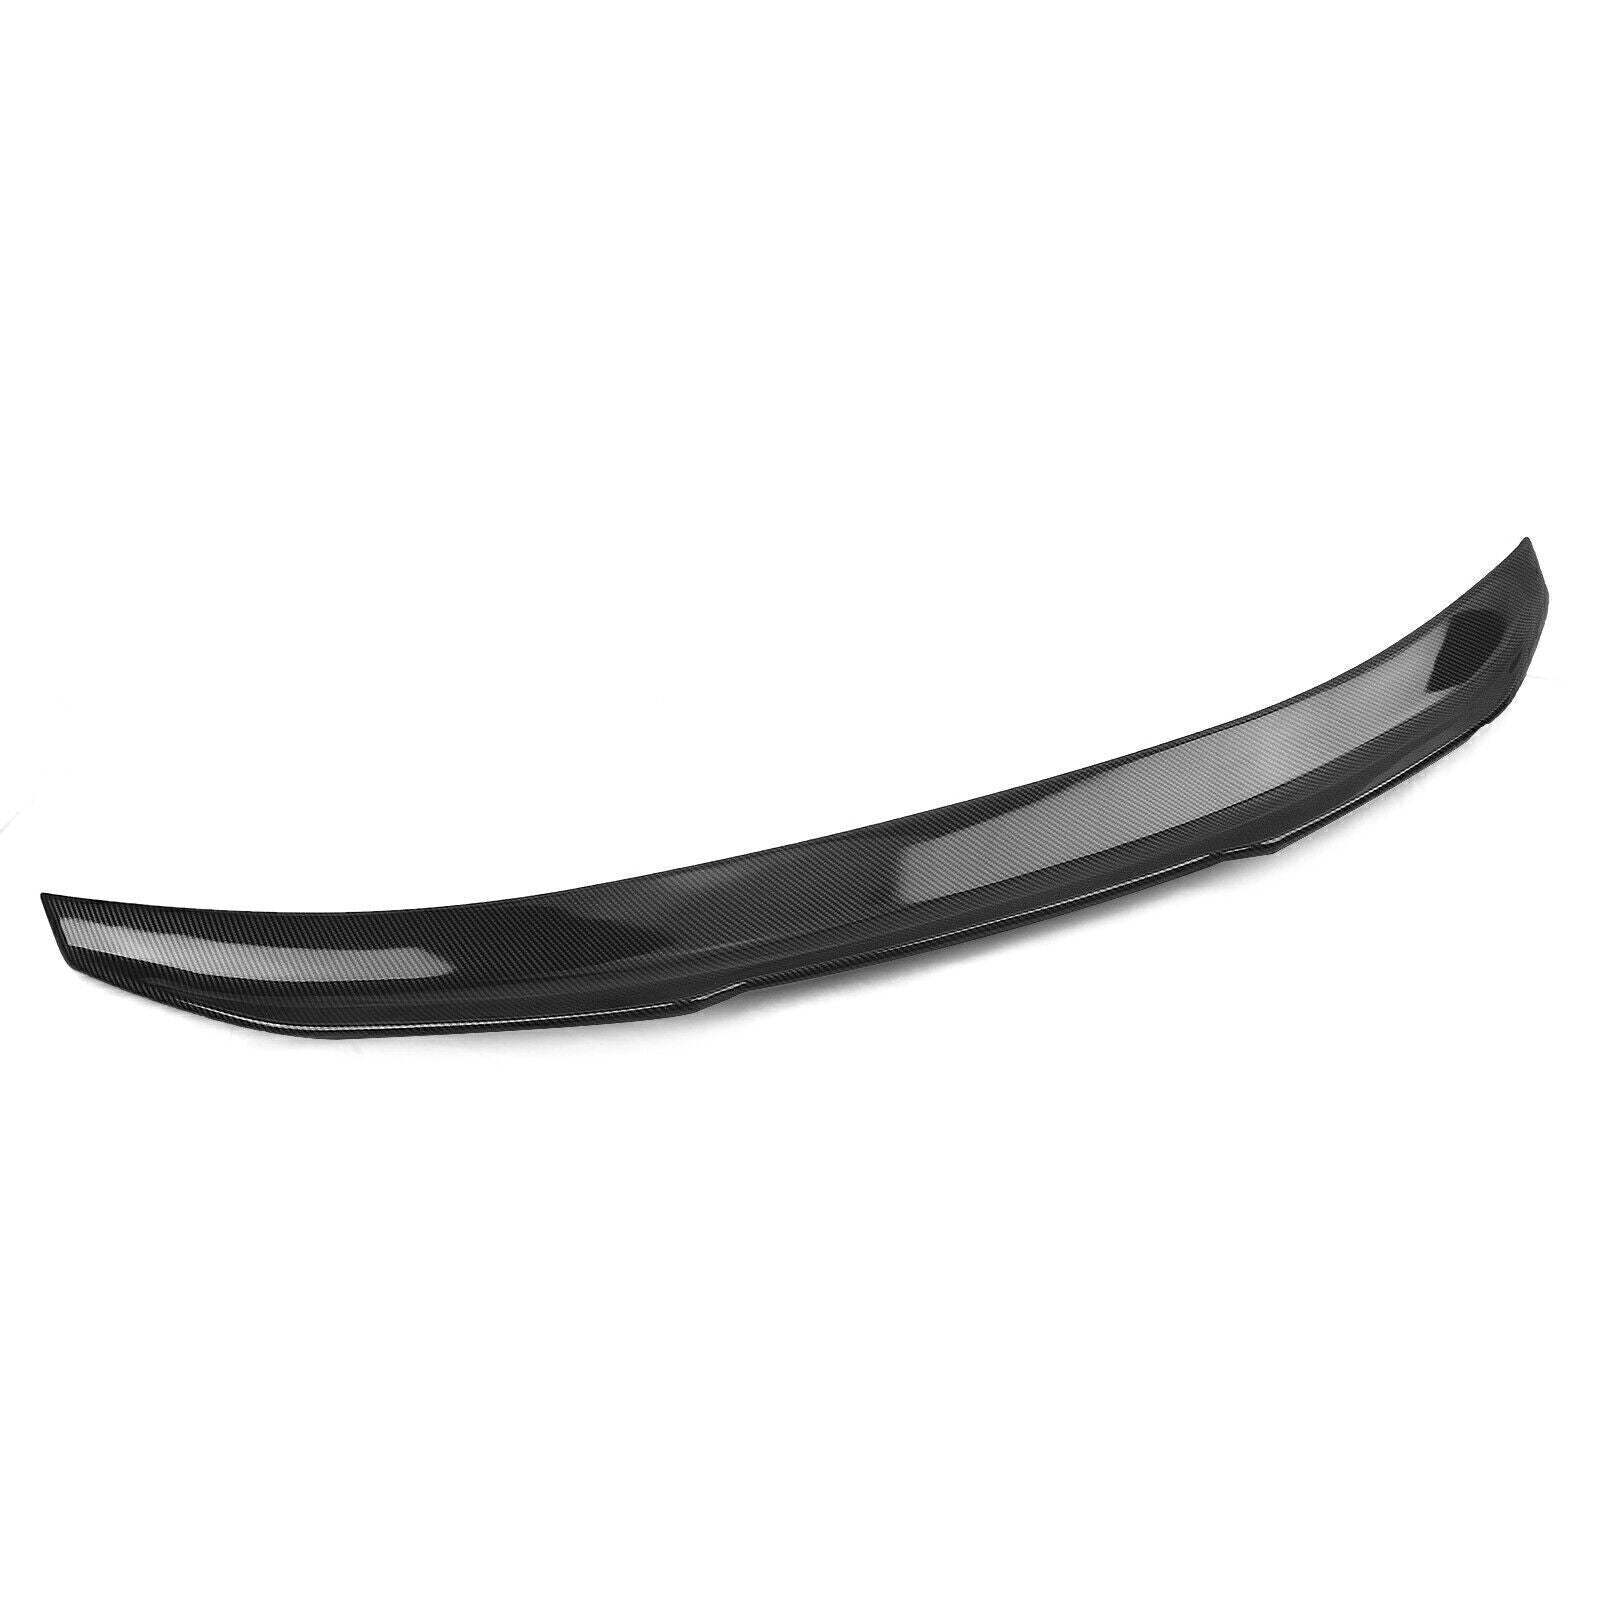 Primary image for 1Pc Carbon Fiber Rear Trunk Spoiler Wing Lip For BMW F33 F83 M4 2014-2020 Conver